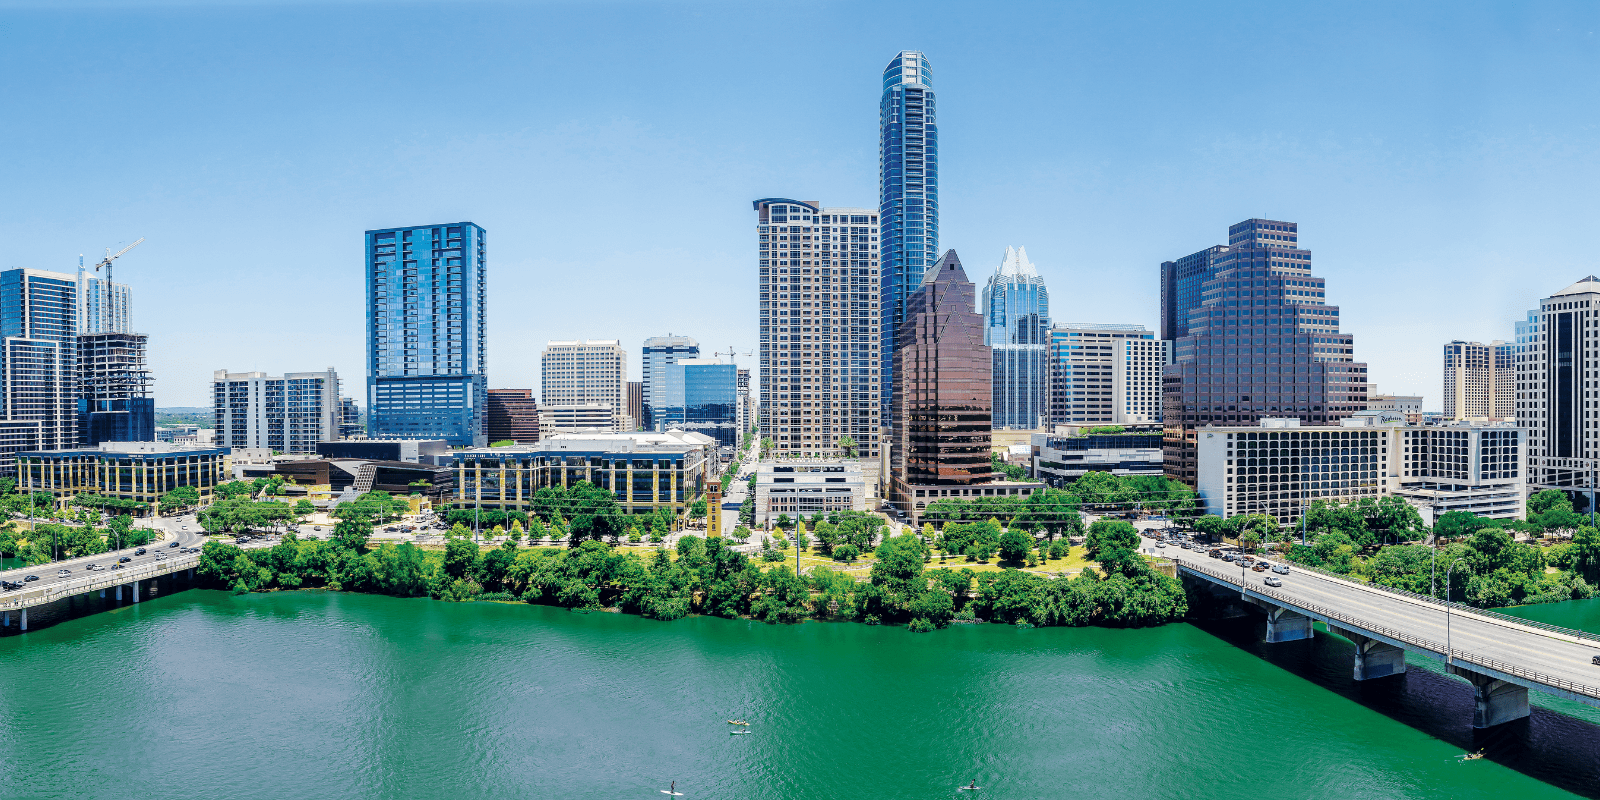 Image from downtownaustin.com